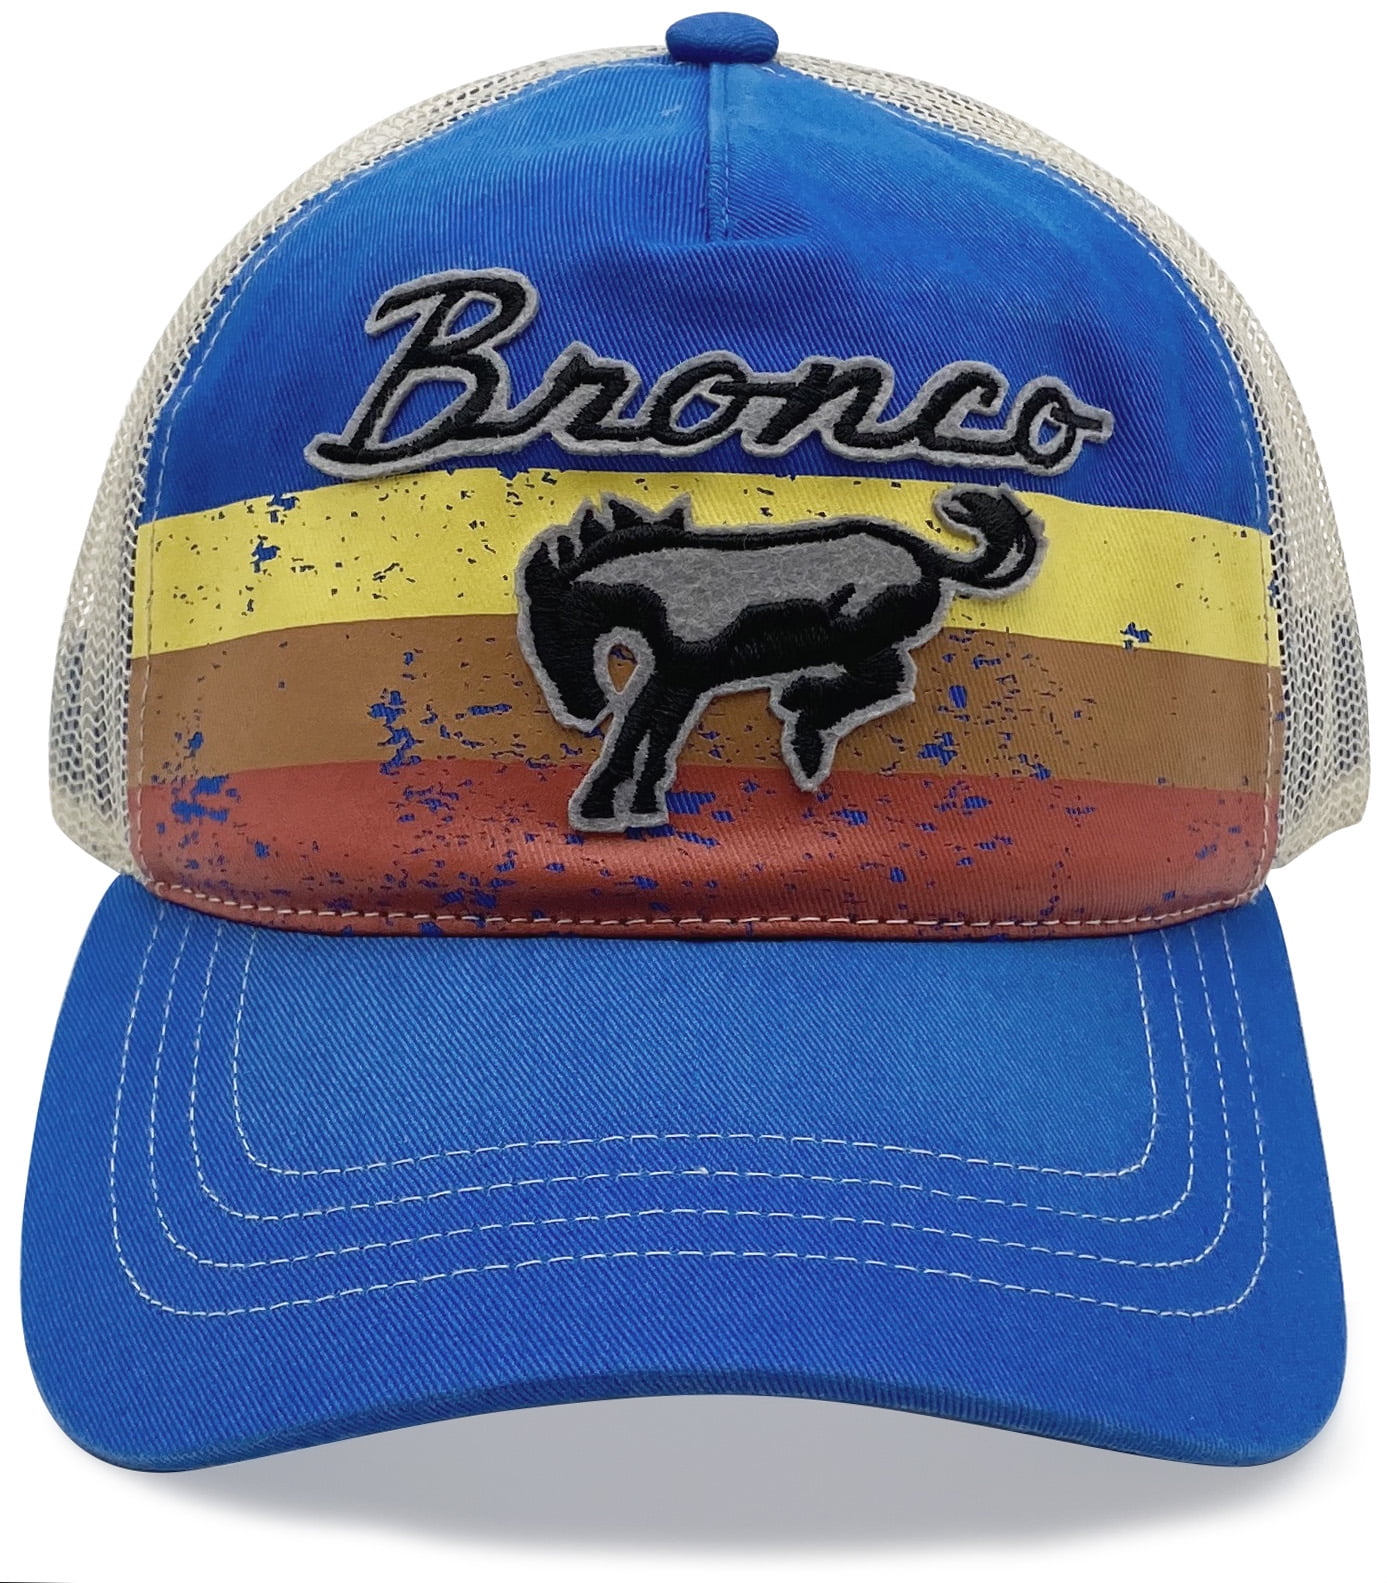 Ford Bronco Embroidered Logo Washed Cotton Adjustable Truck Hat with Curved Brim, Royal Blue, One Size